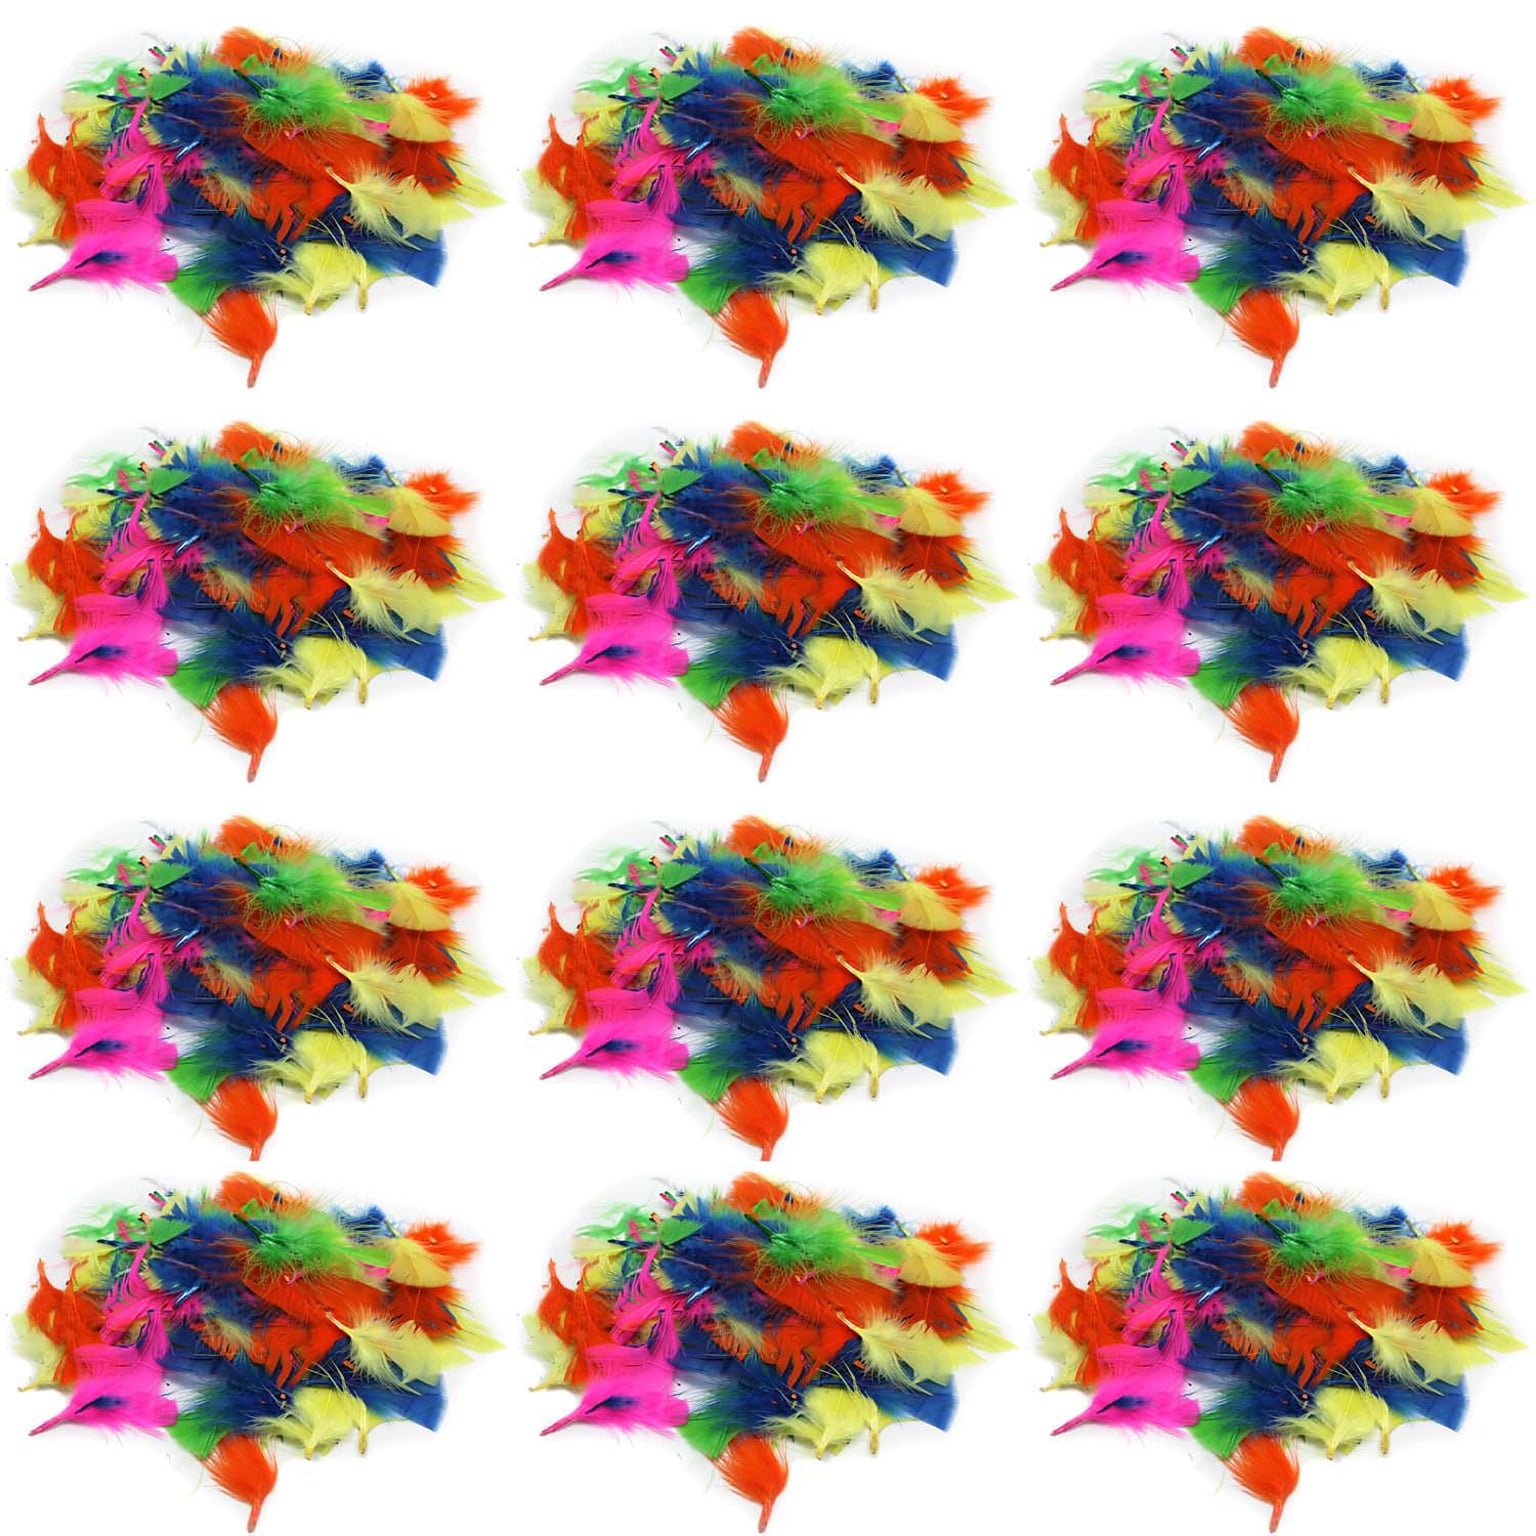 CLI Creative Arts Turkey Feathers, Hot Colors, 14 Grams/Pack, 12 Packs (CHL63030-12)